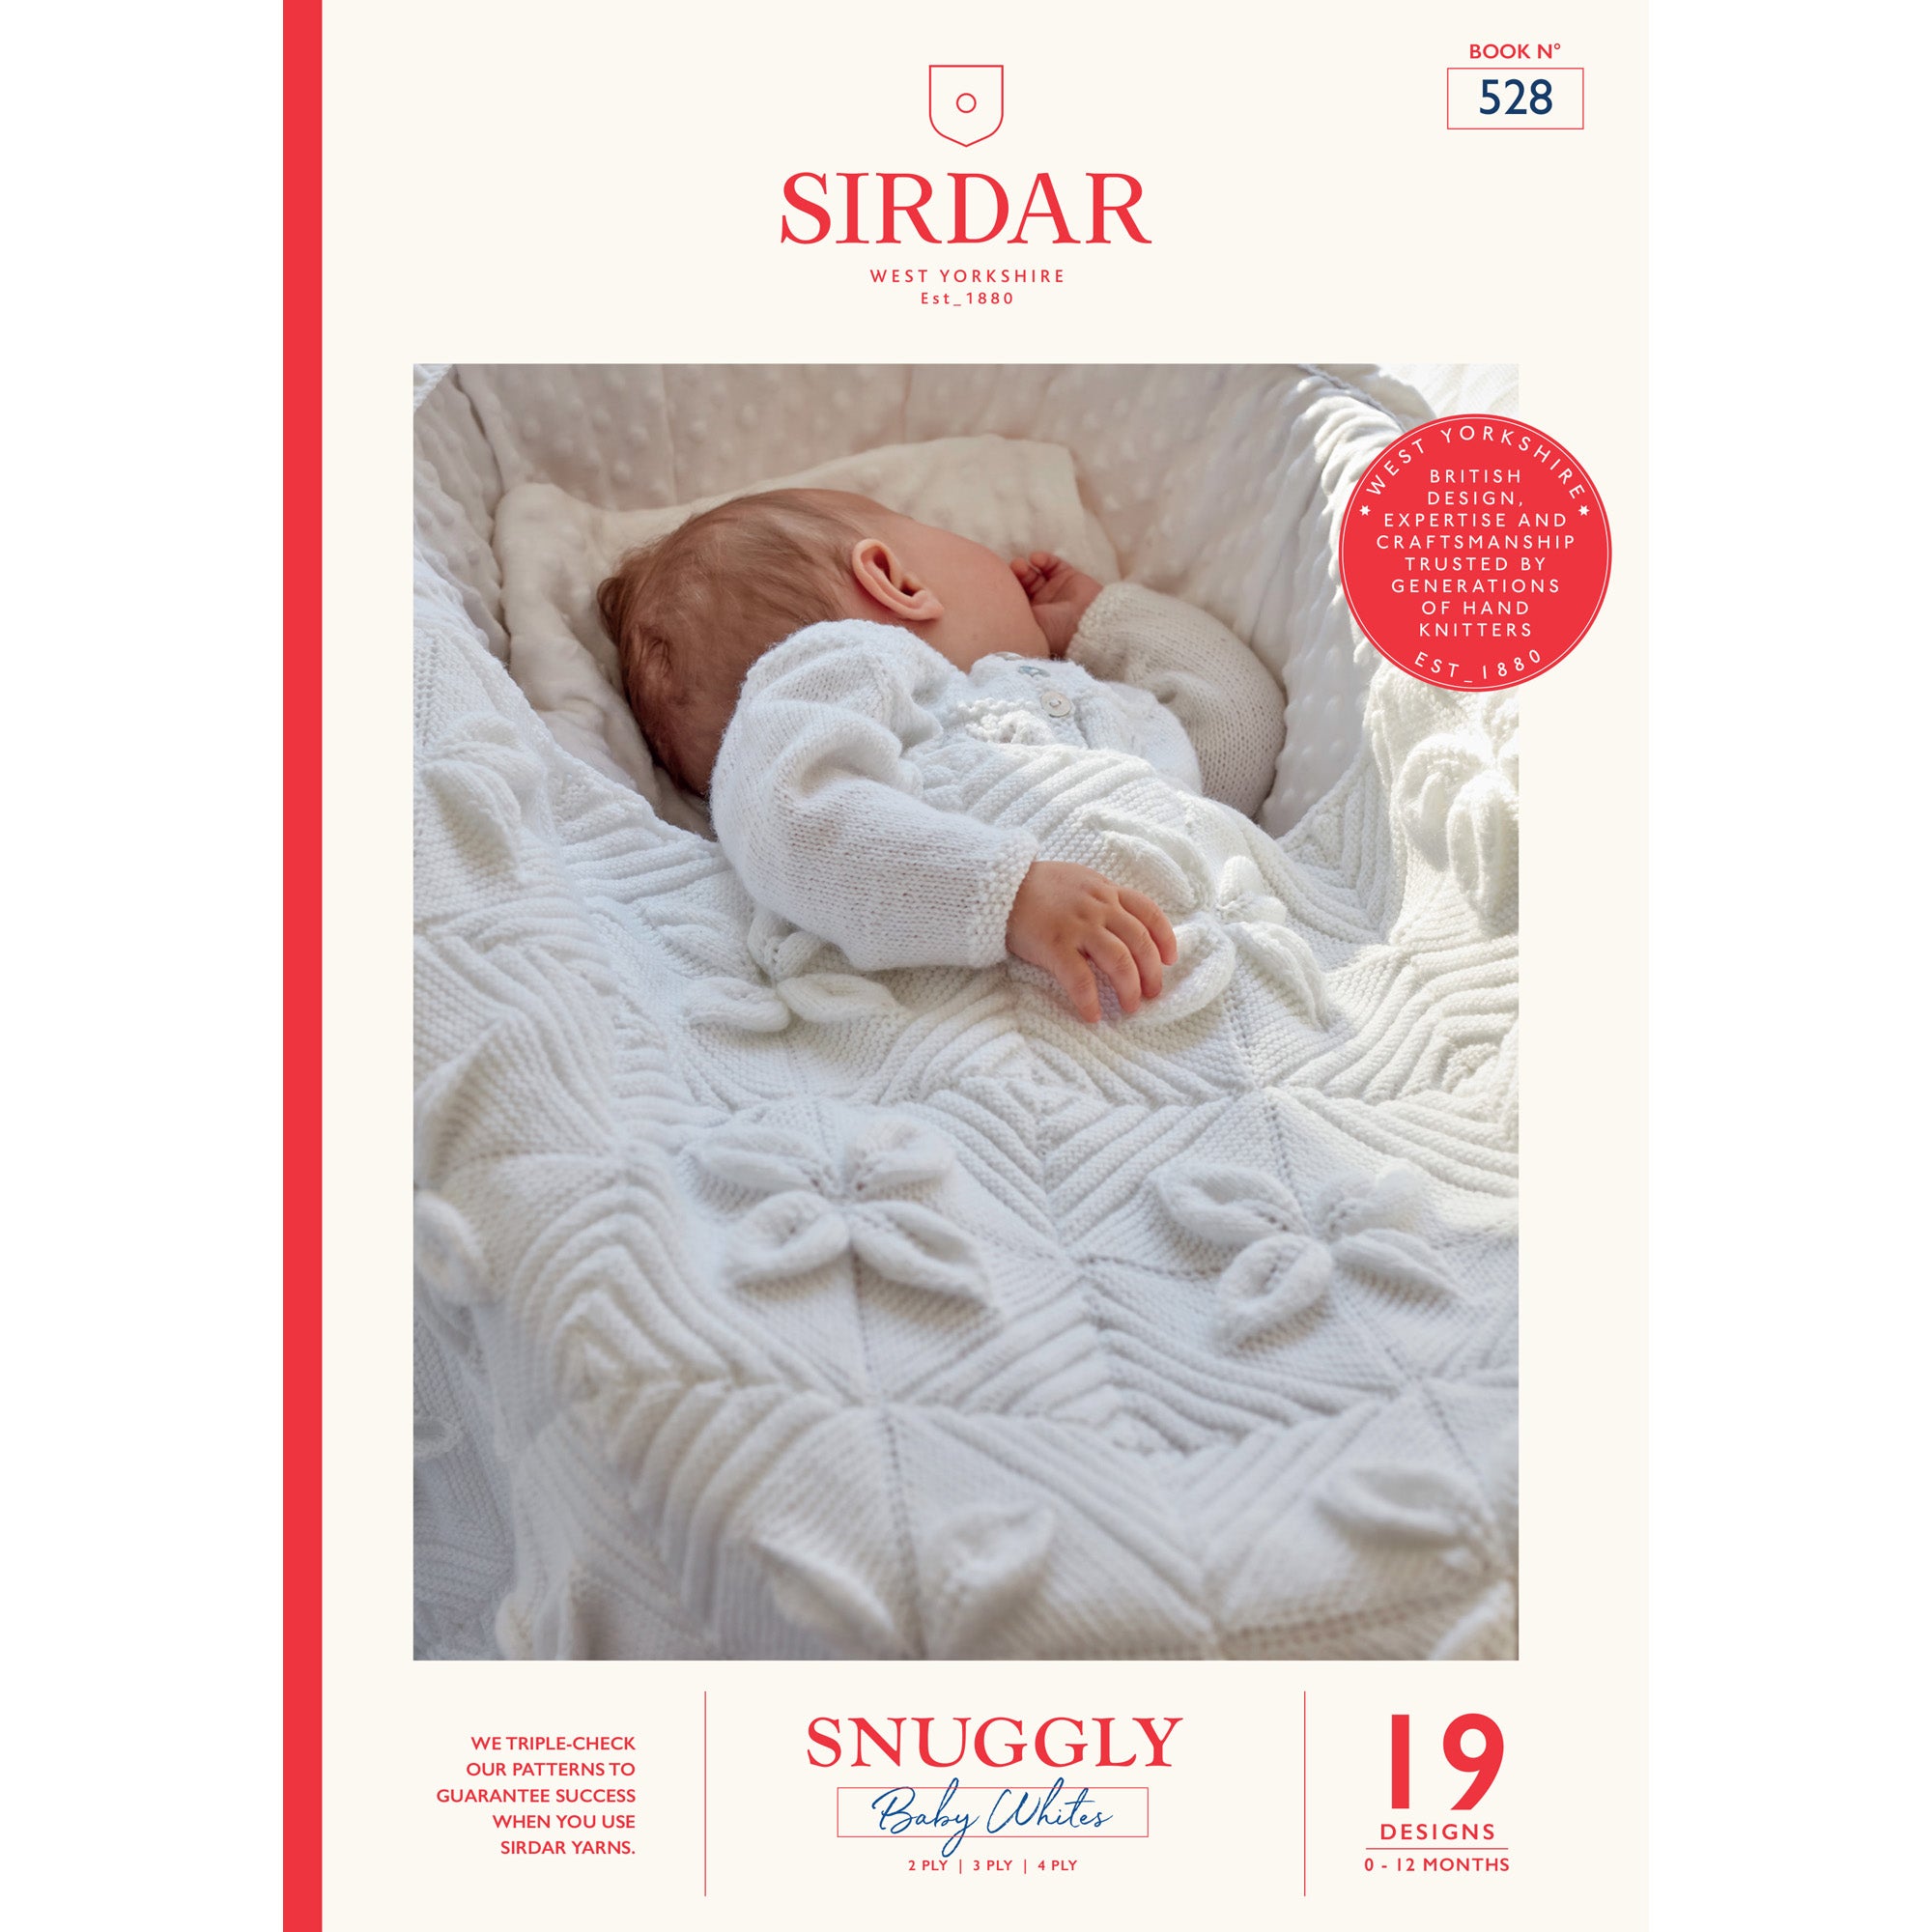 Sirdar 528 Snuggly Classic Whites Knitting Pattern Book